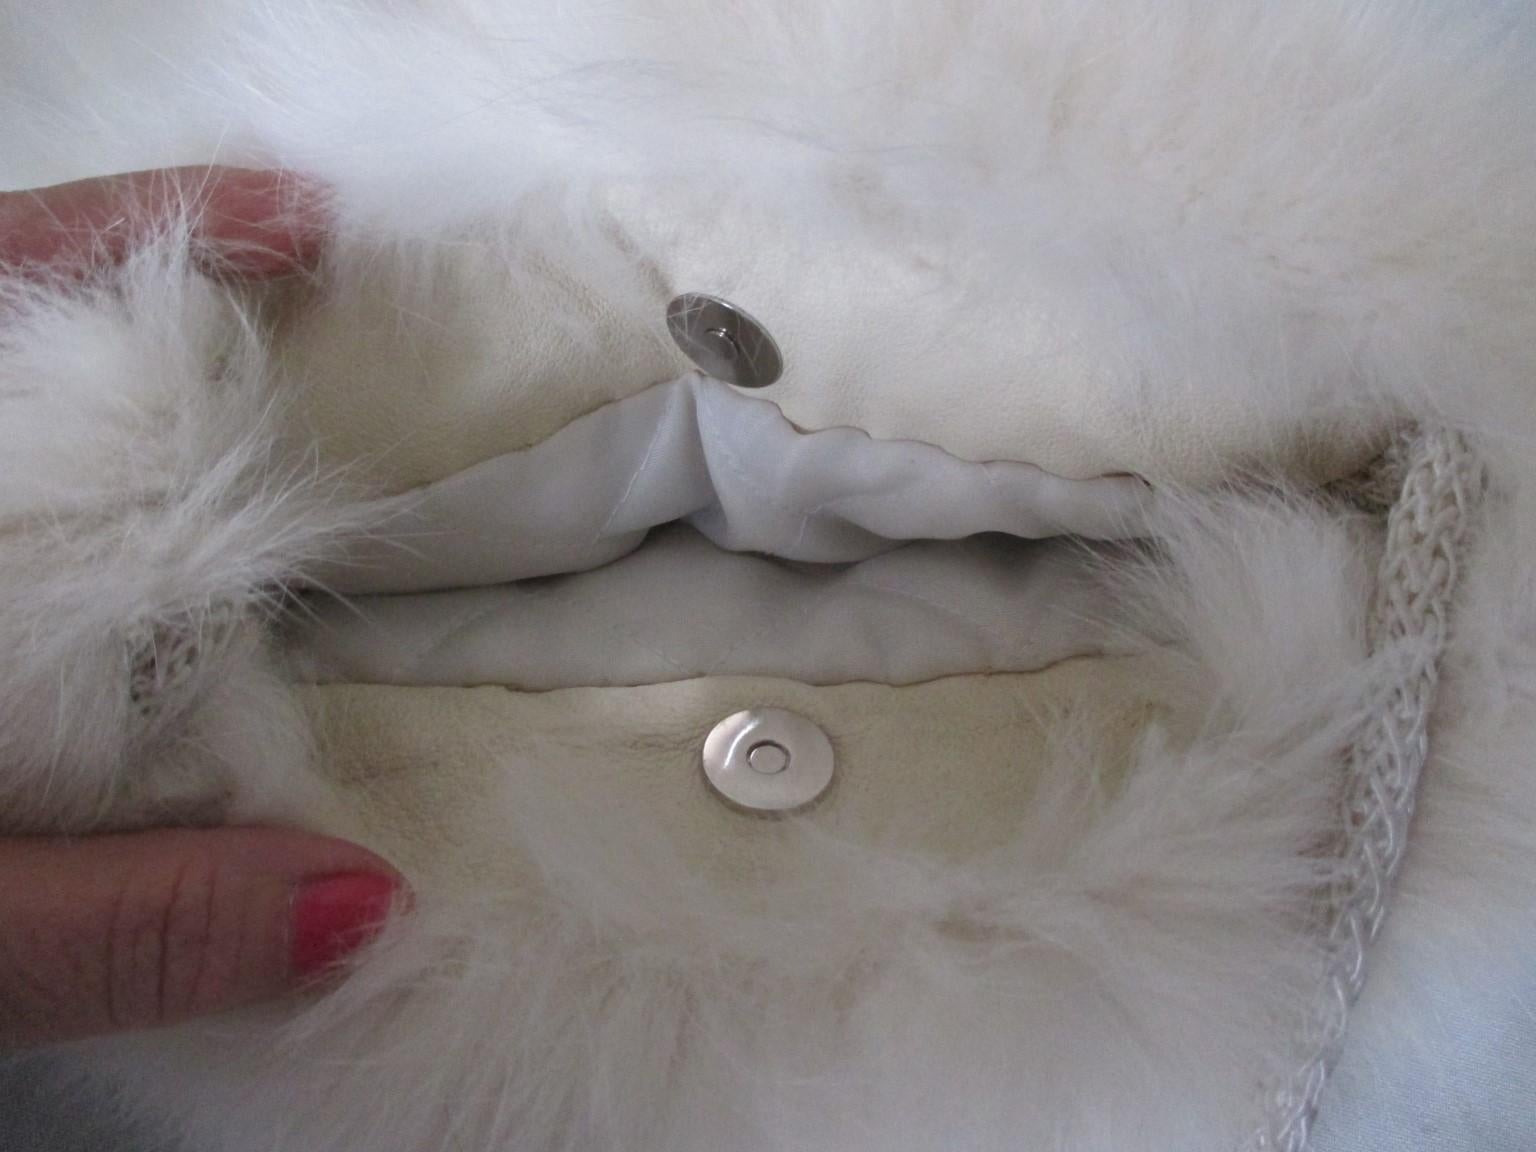 This vintage clutch is made of very soft lynx fur with a press button closure and a chain.
measurements:
25cm /9.48 inch  x  23 cm /9.05 inch
Chain 138 cm/54.33 inch

Please note that vintage items are not new and therefore might have minor